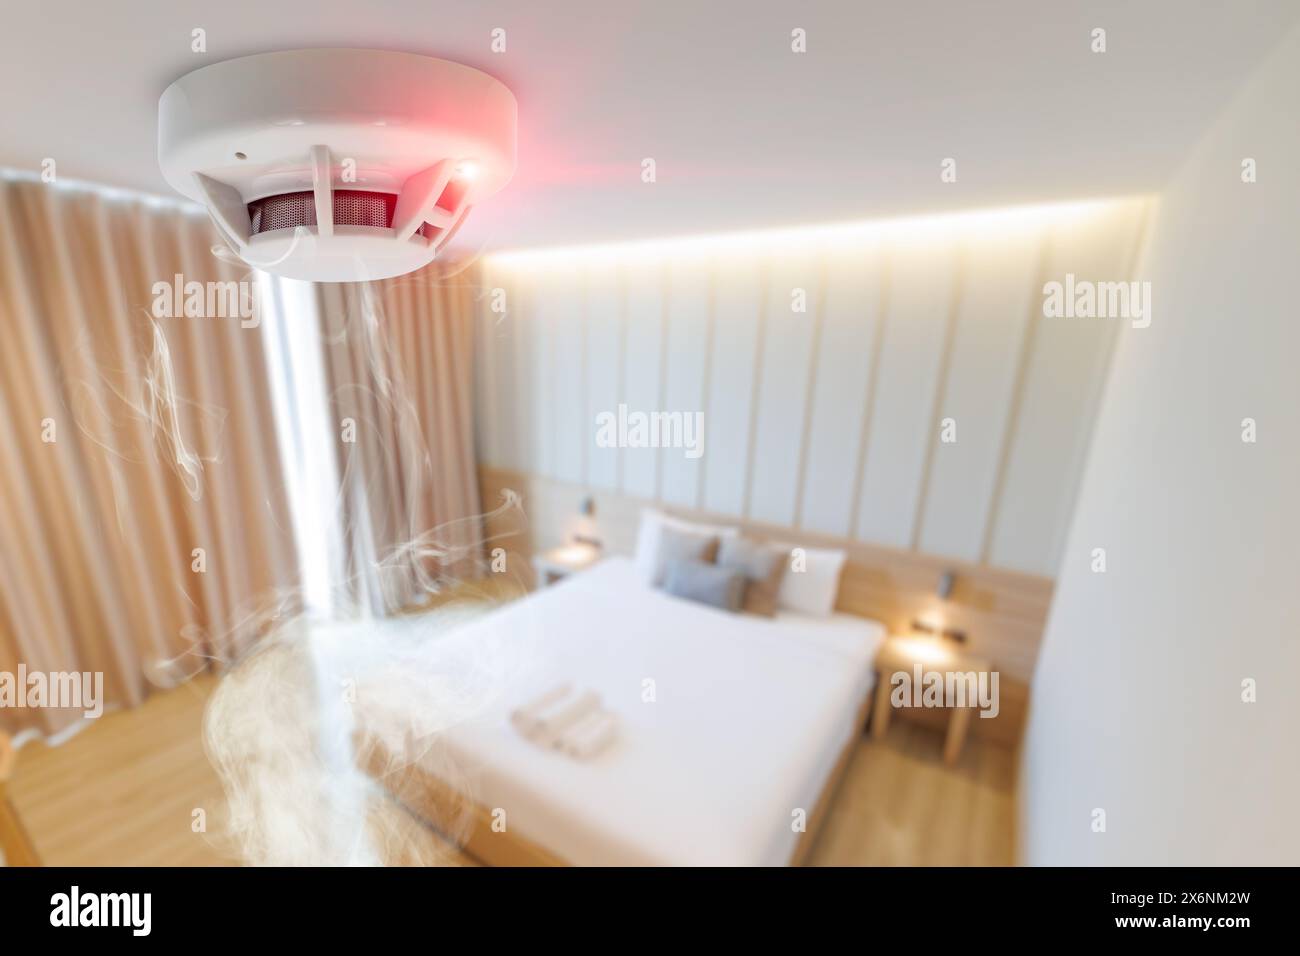 hotel bad room smoke fire detector install at ceiling. fire safety device for home Stock Photo